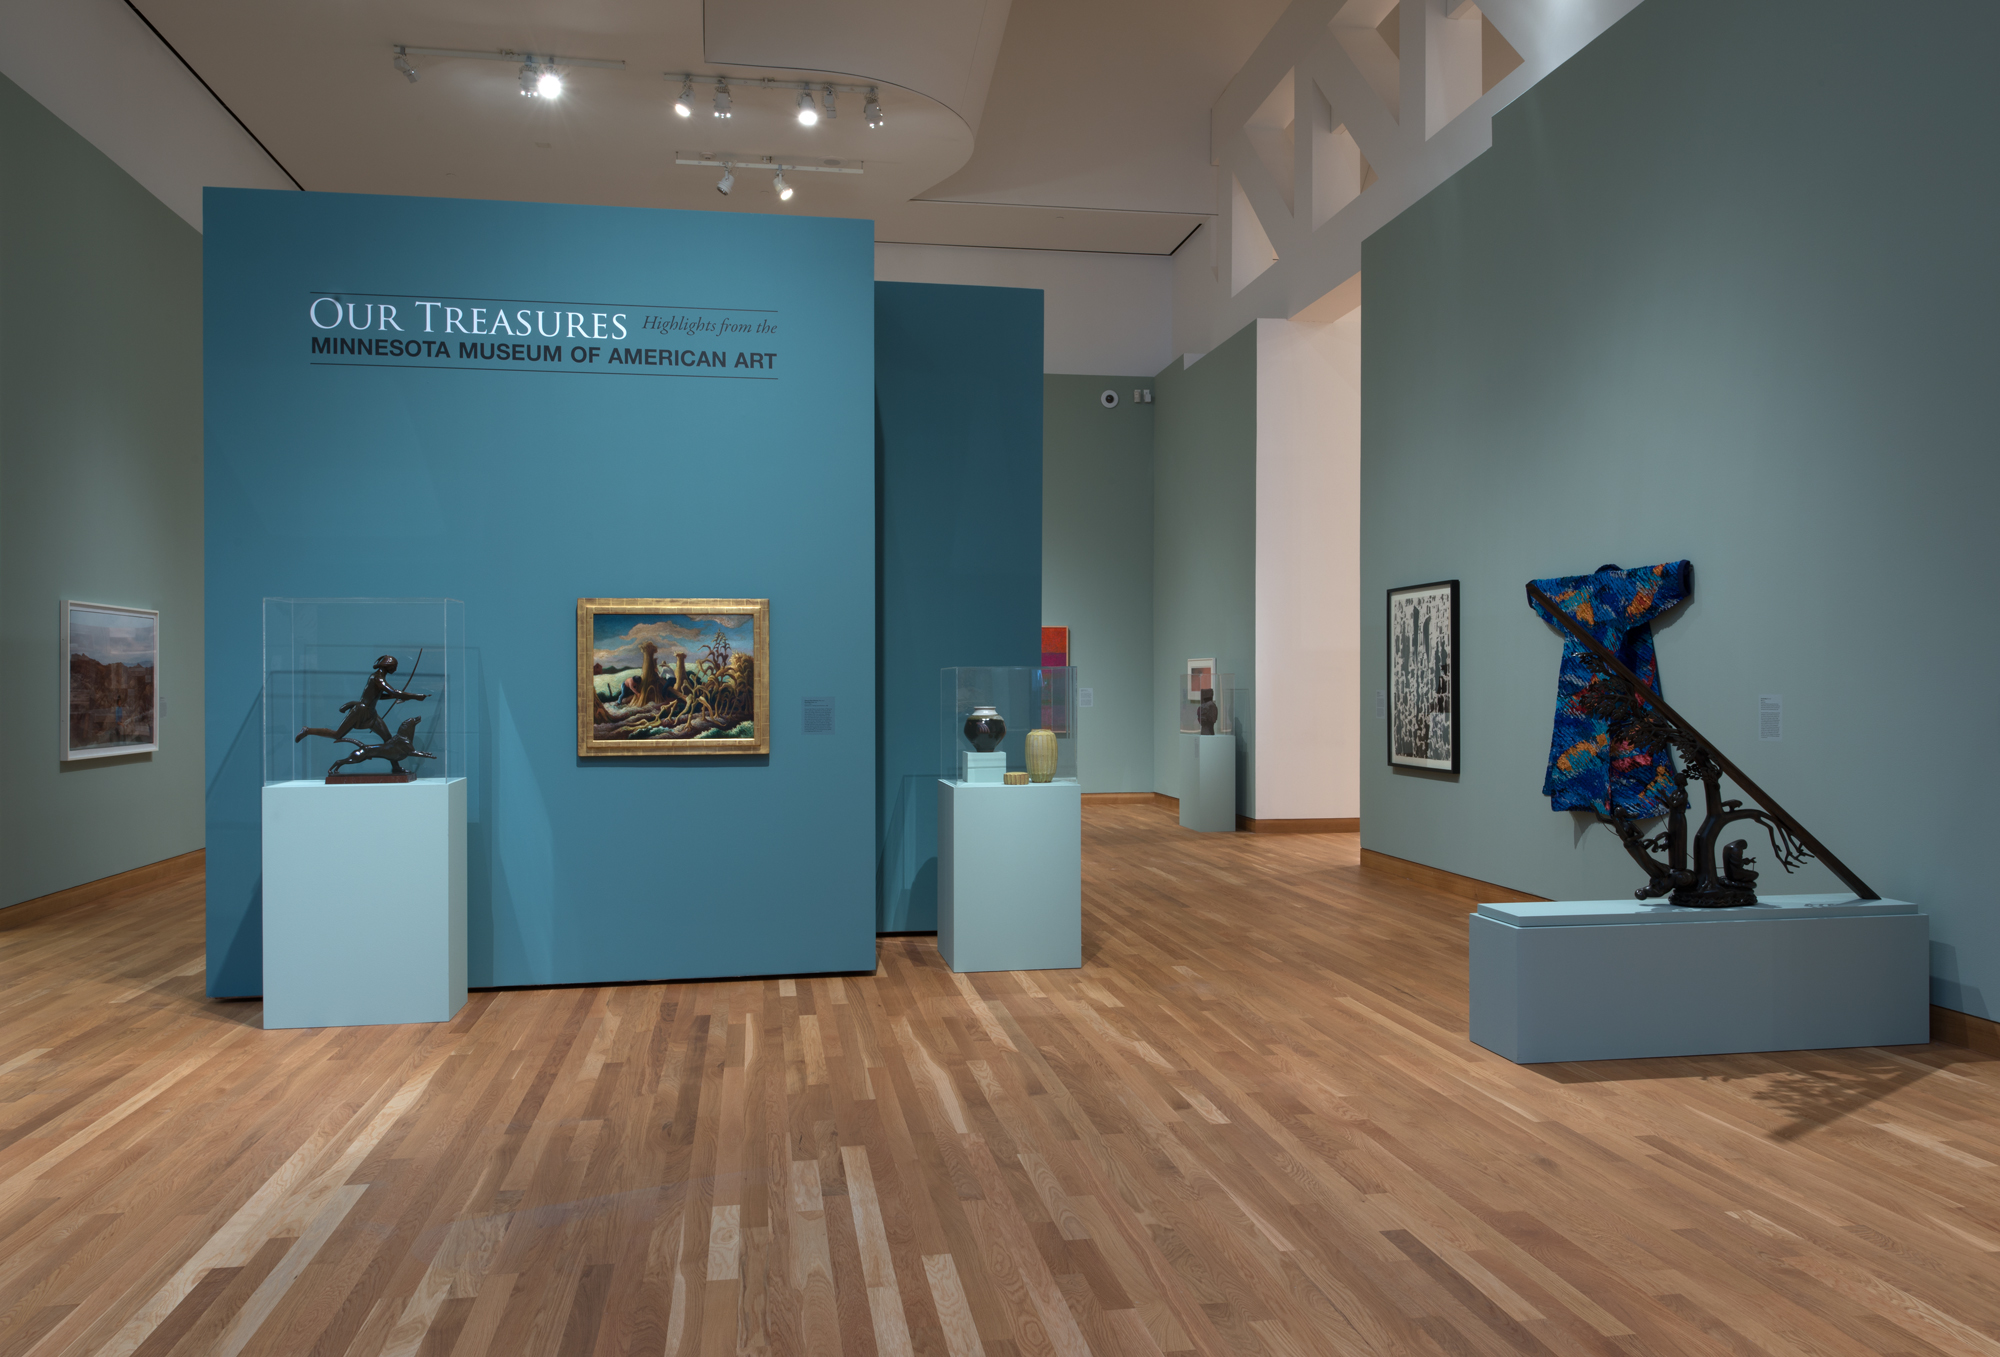 gallery with paintings and scultpures on display